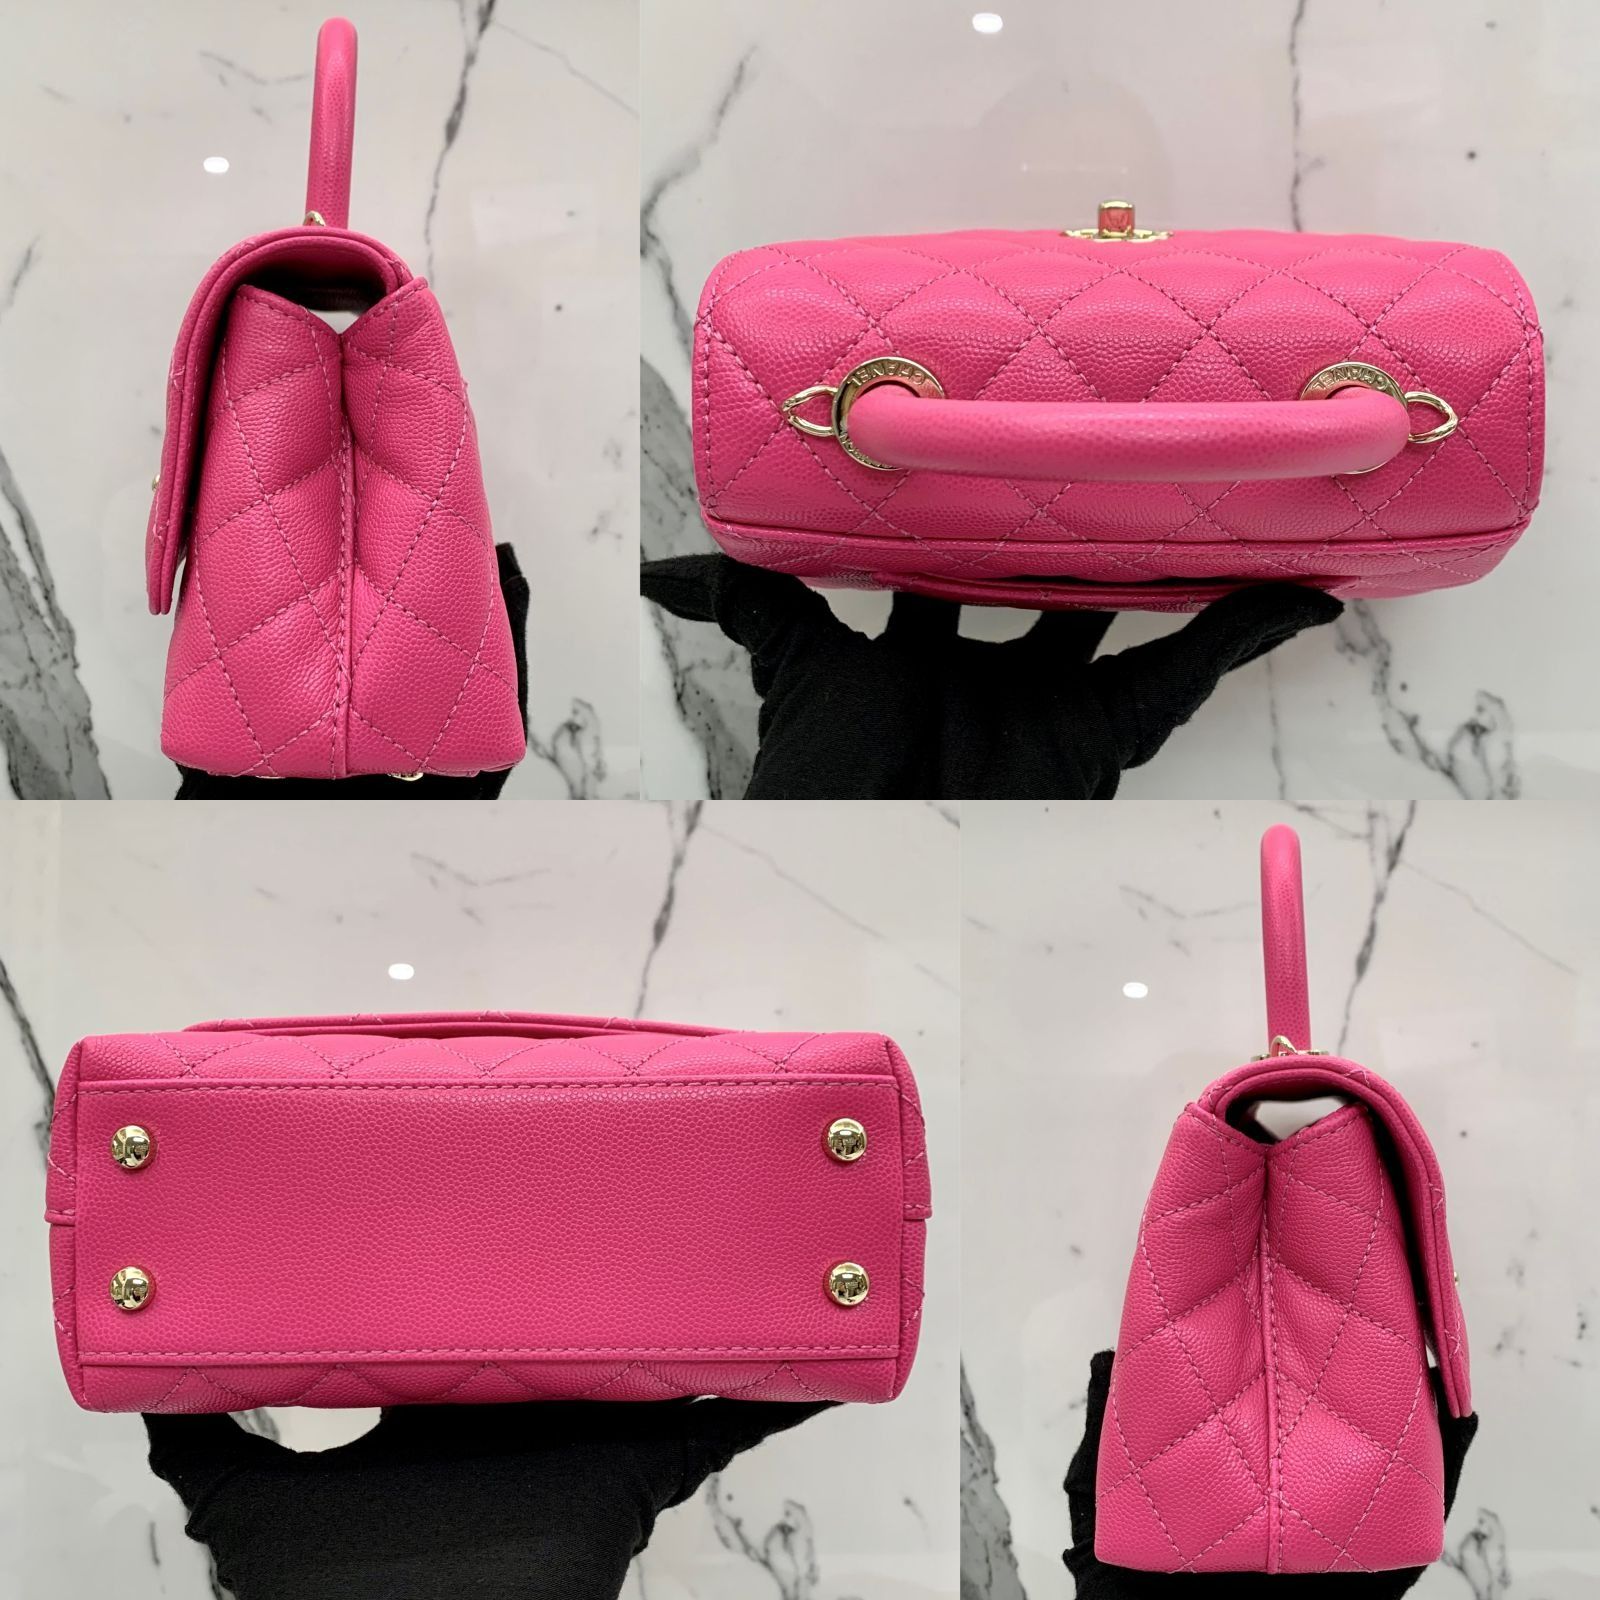 Flap Top Handle Quilted Light Pink Leather SHW